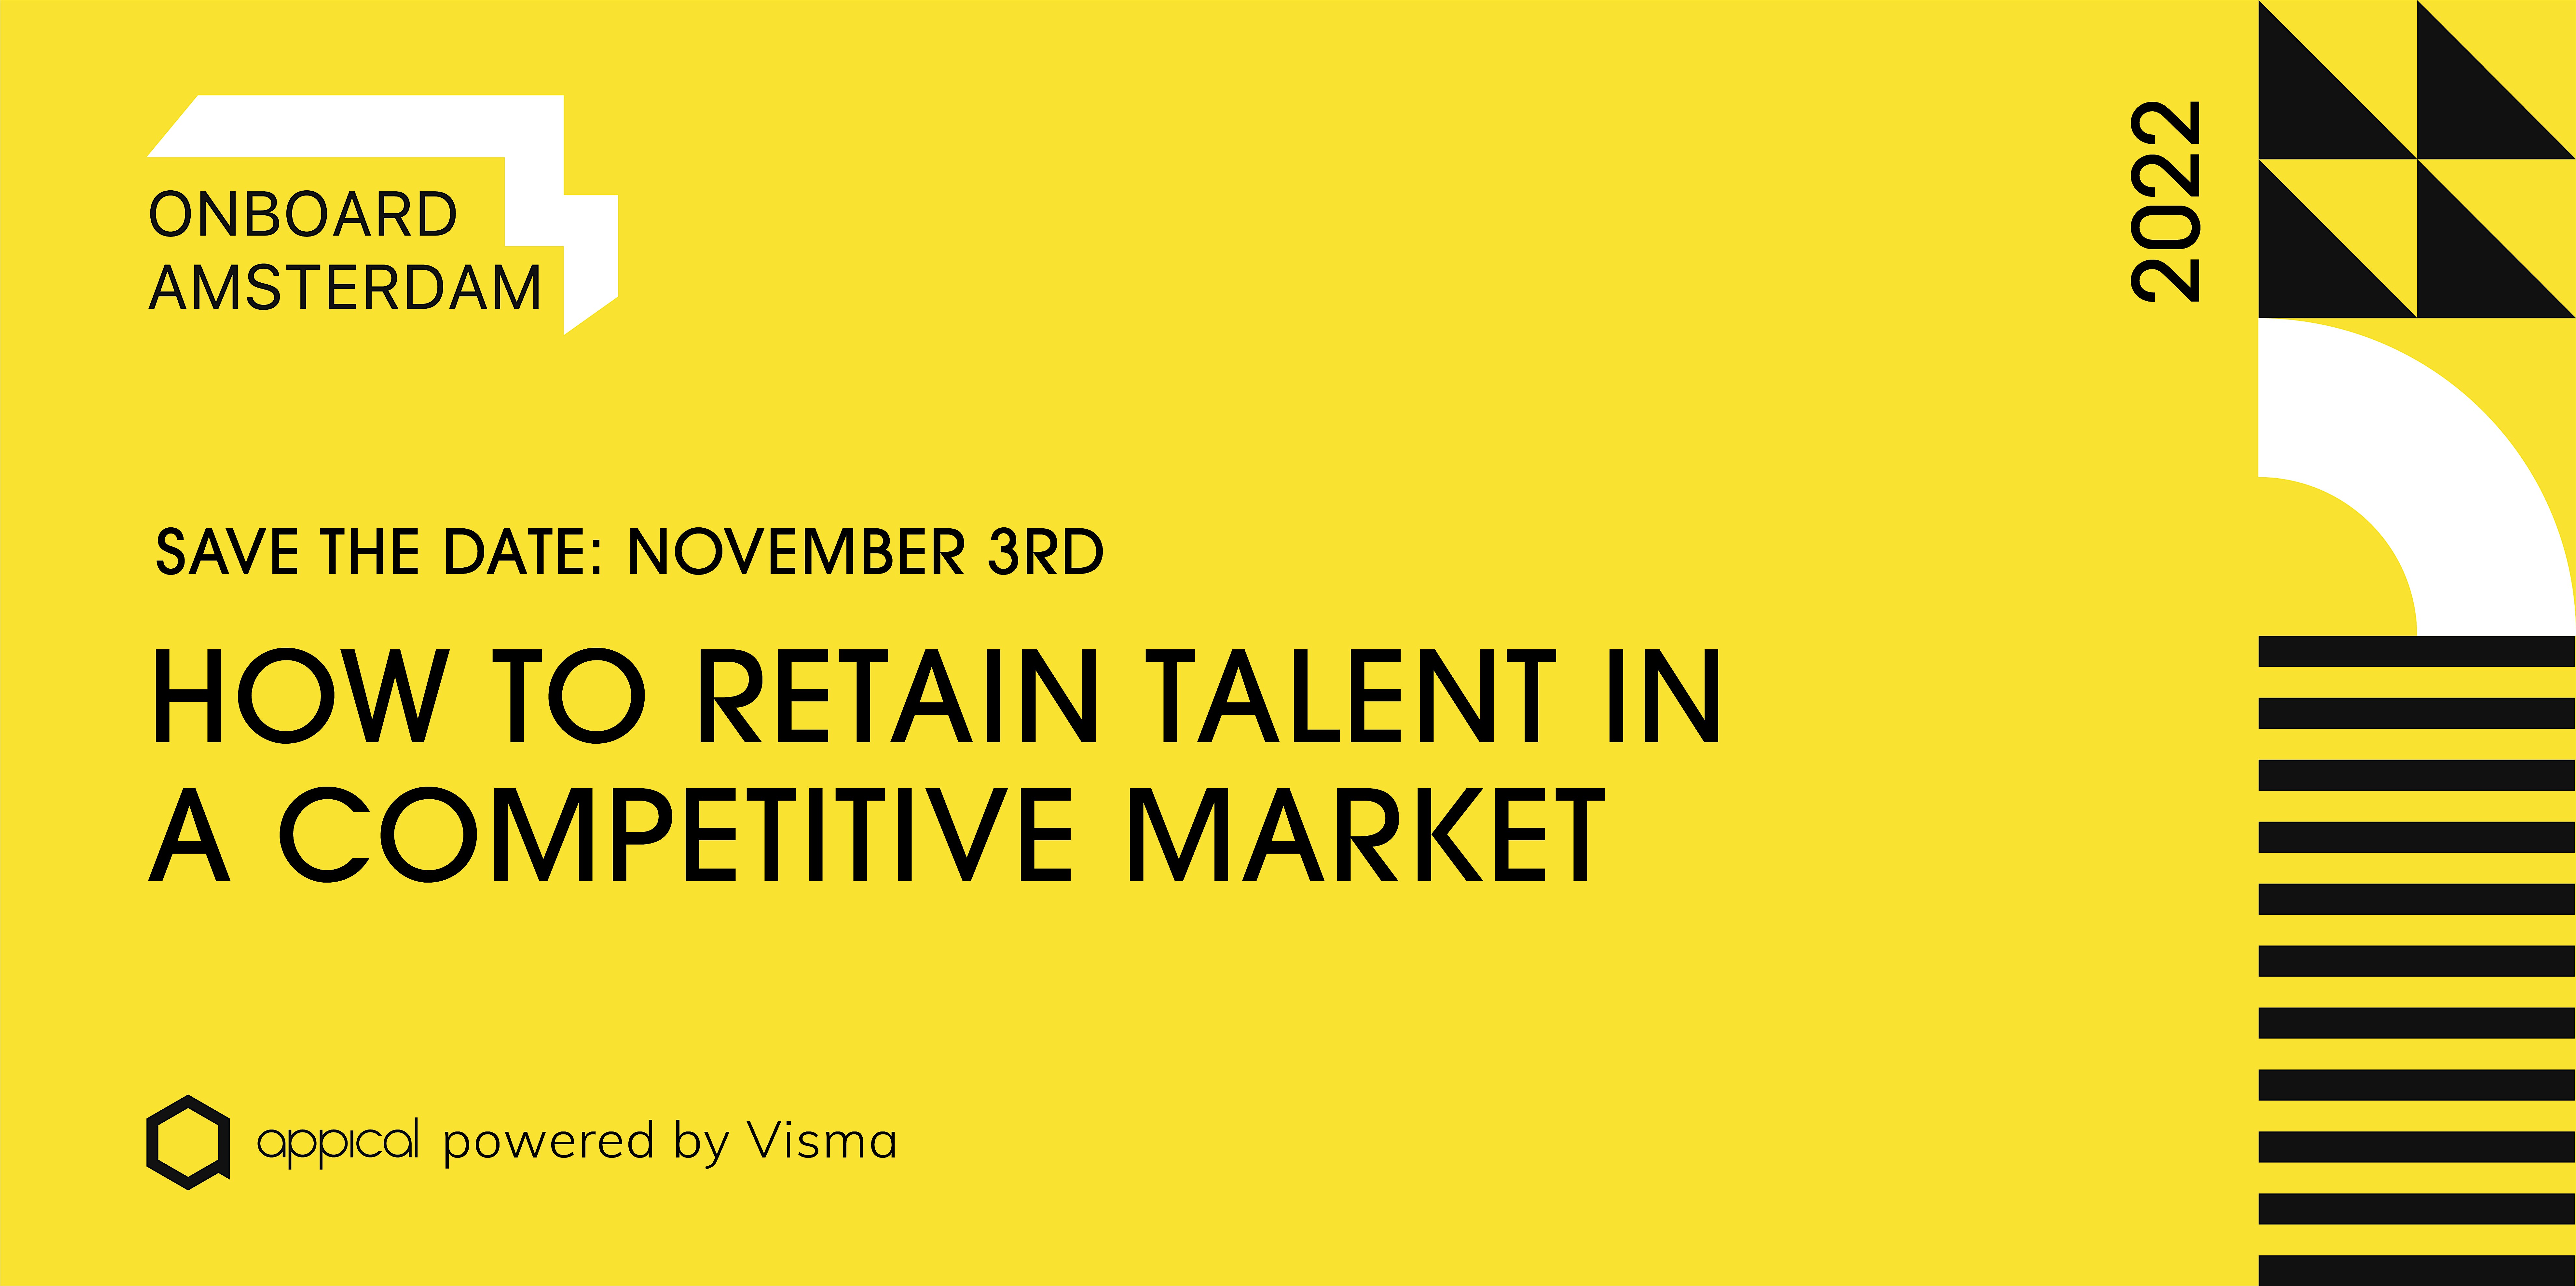 Onboard Amsterdam 2022 - How to retain talent in a competitive market